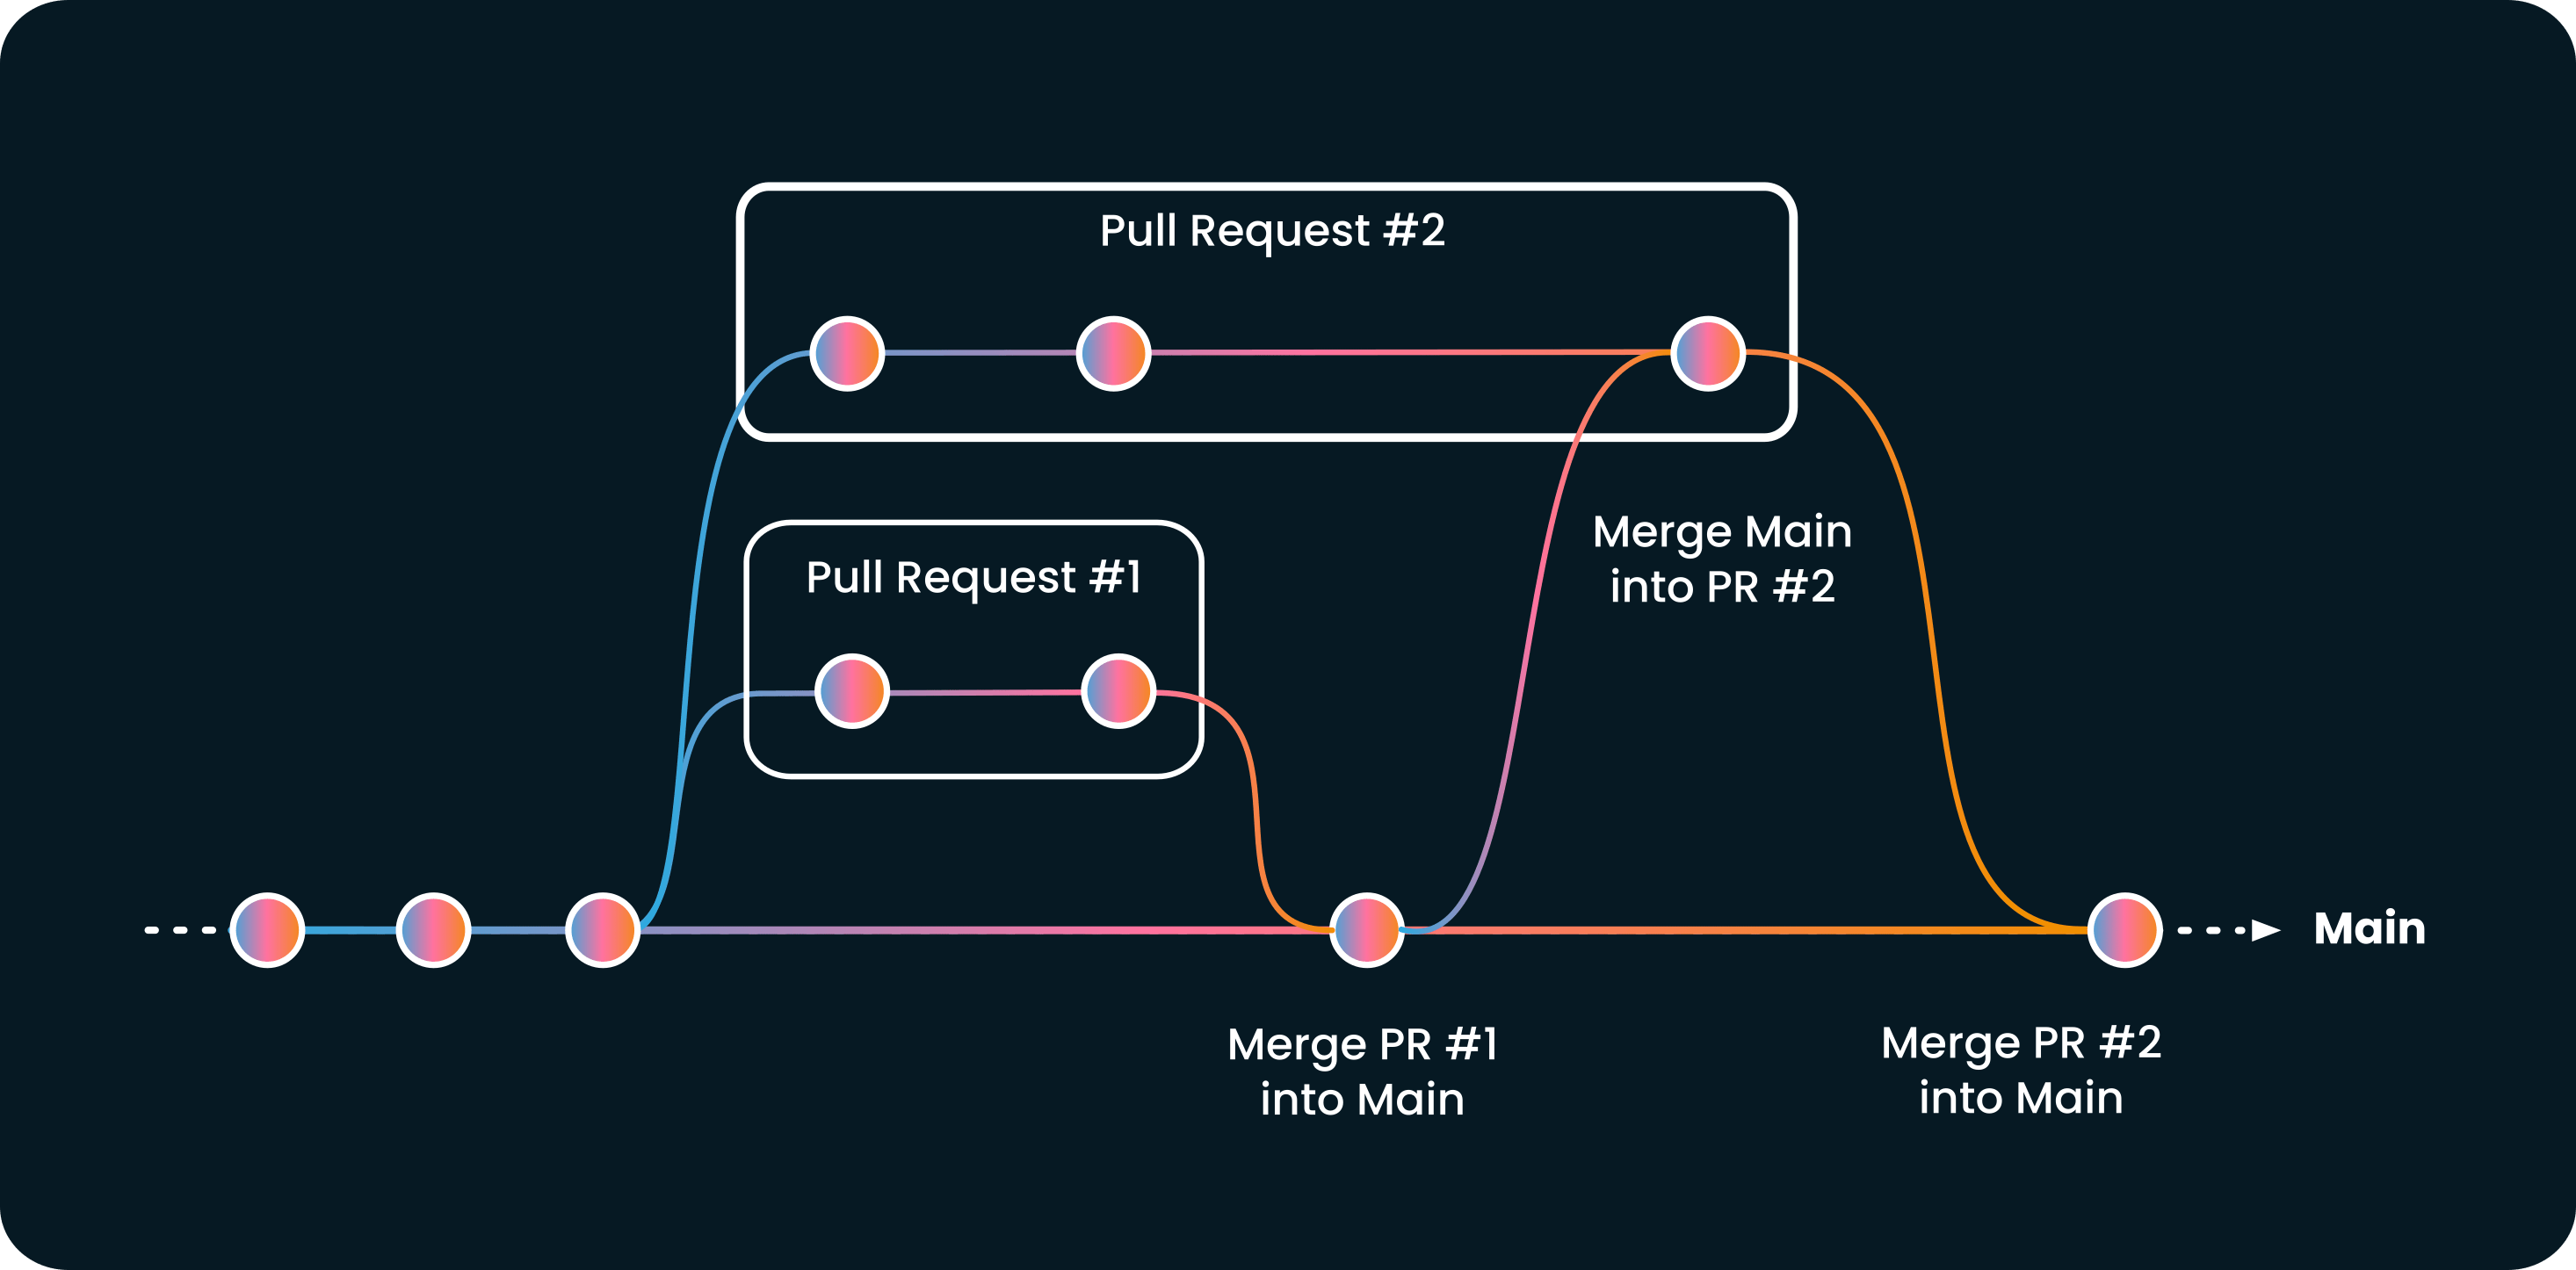 Benefits of Using a Merge Queue in Github